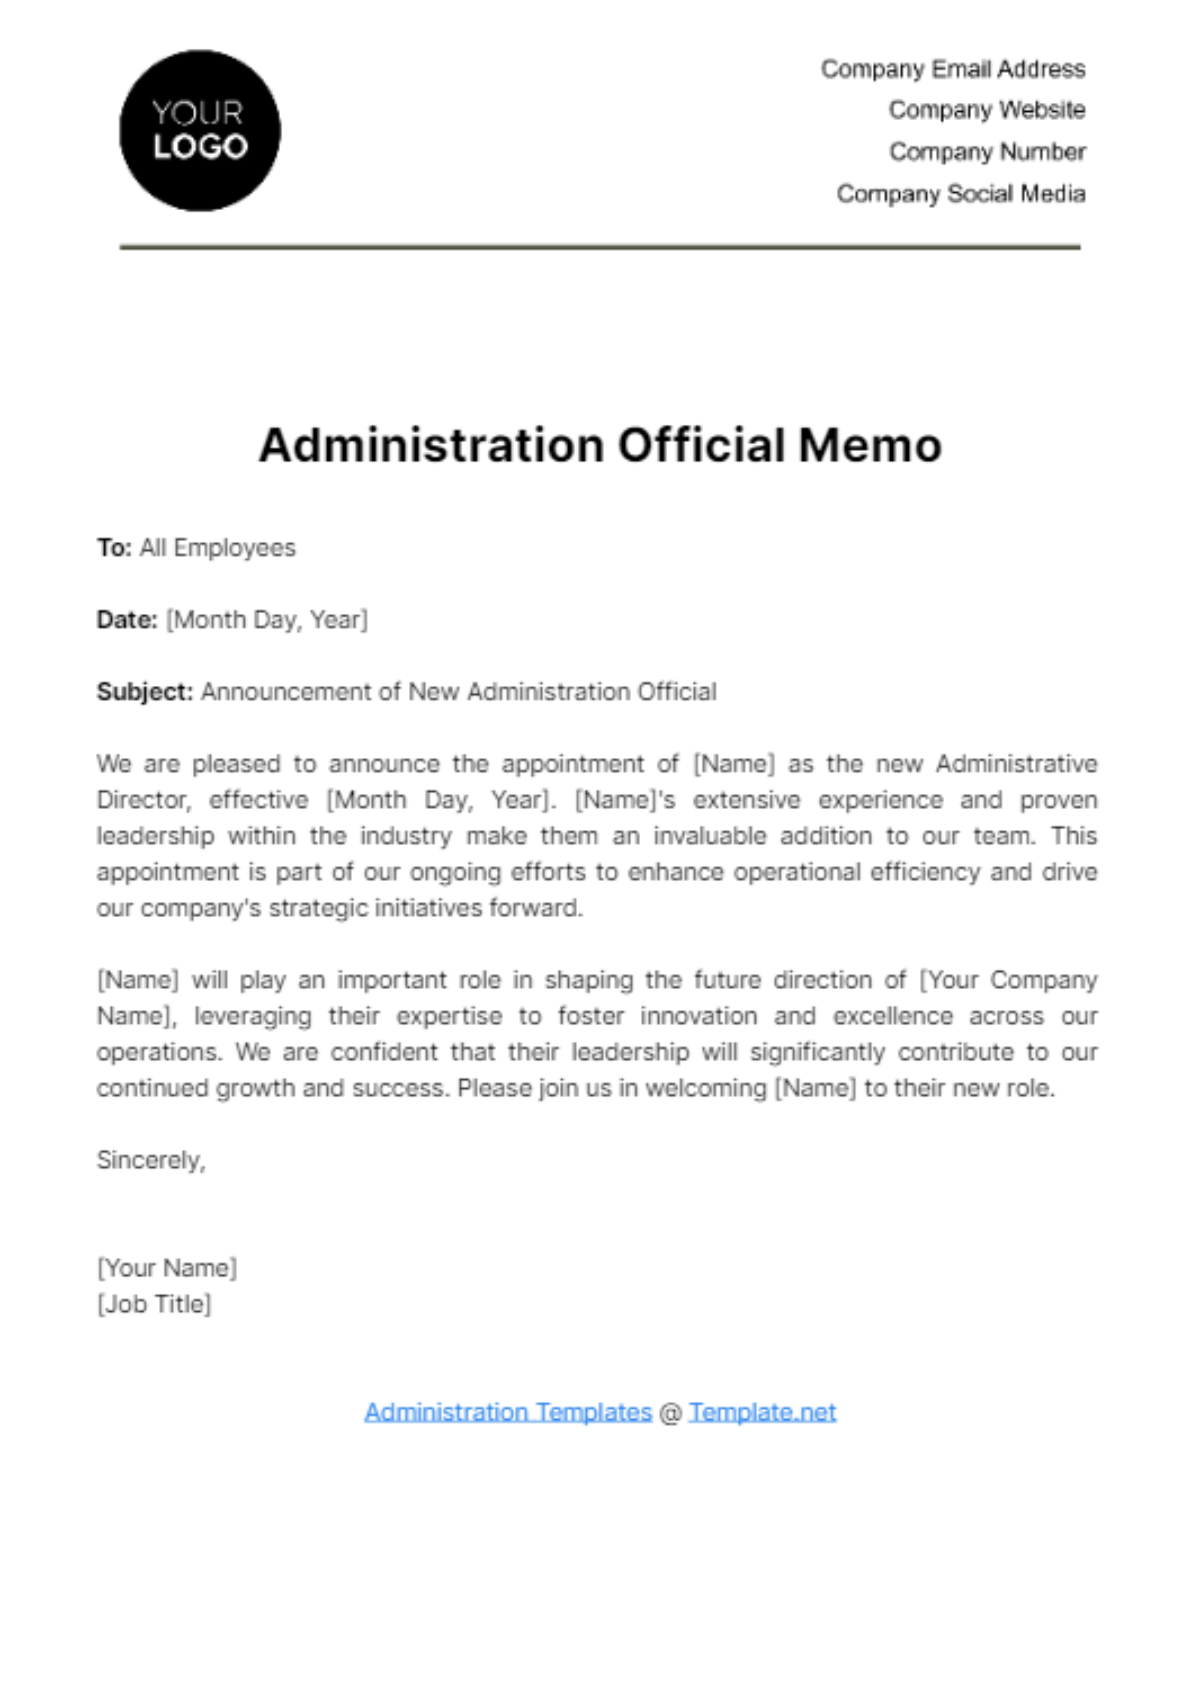 Free Administration Official Memo Template